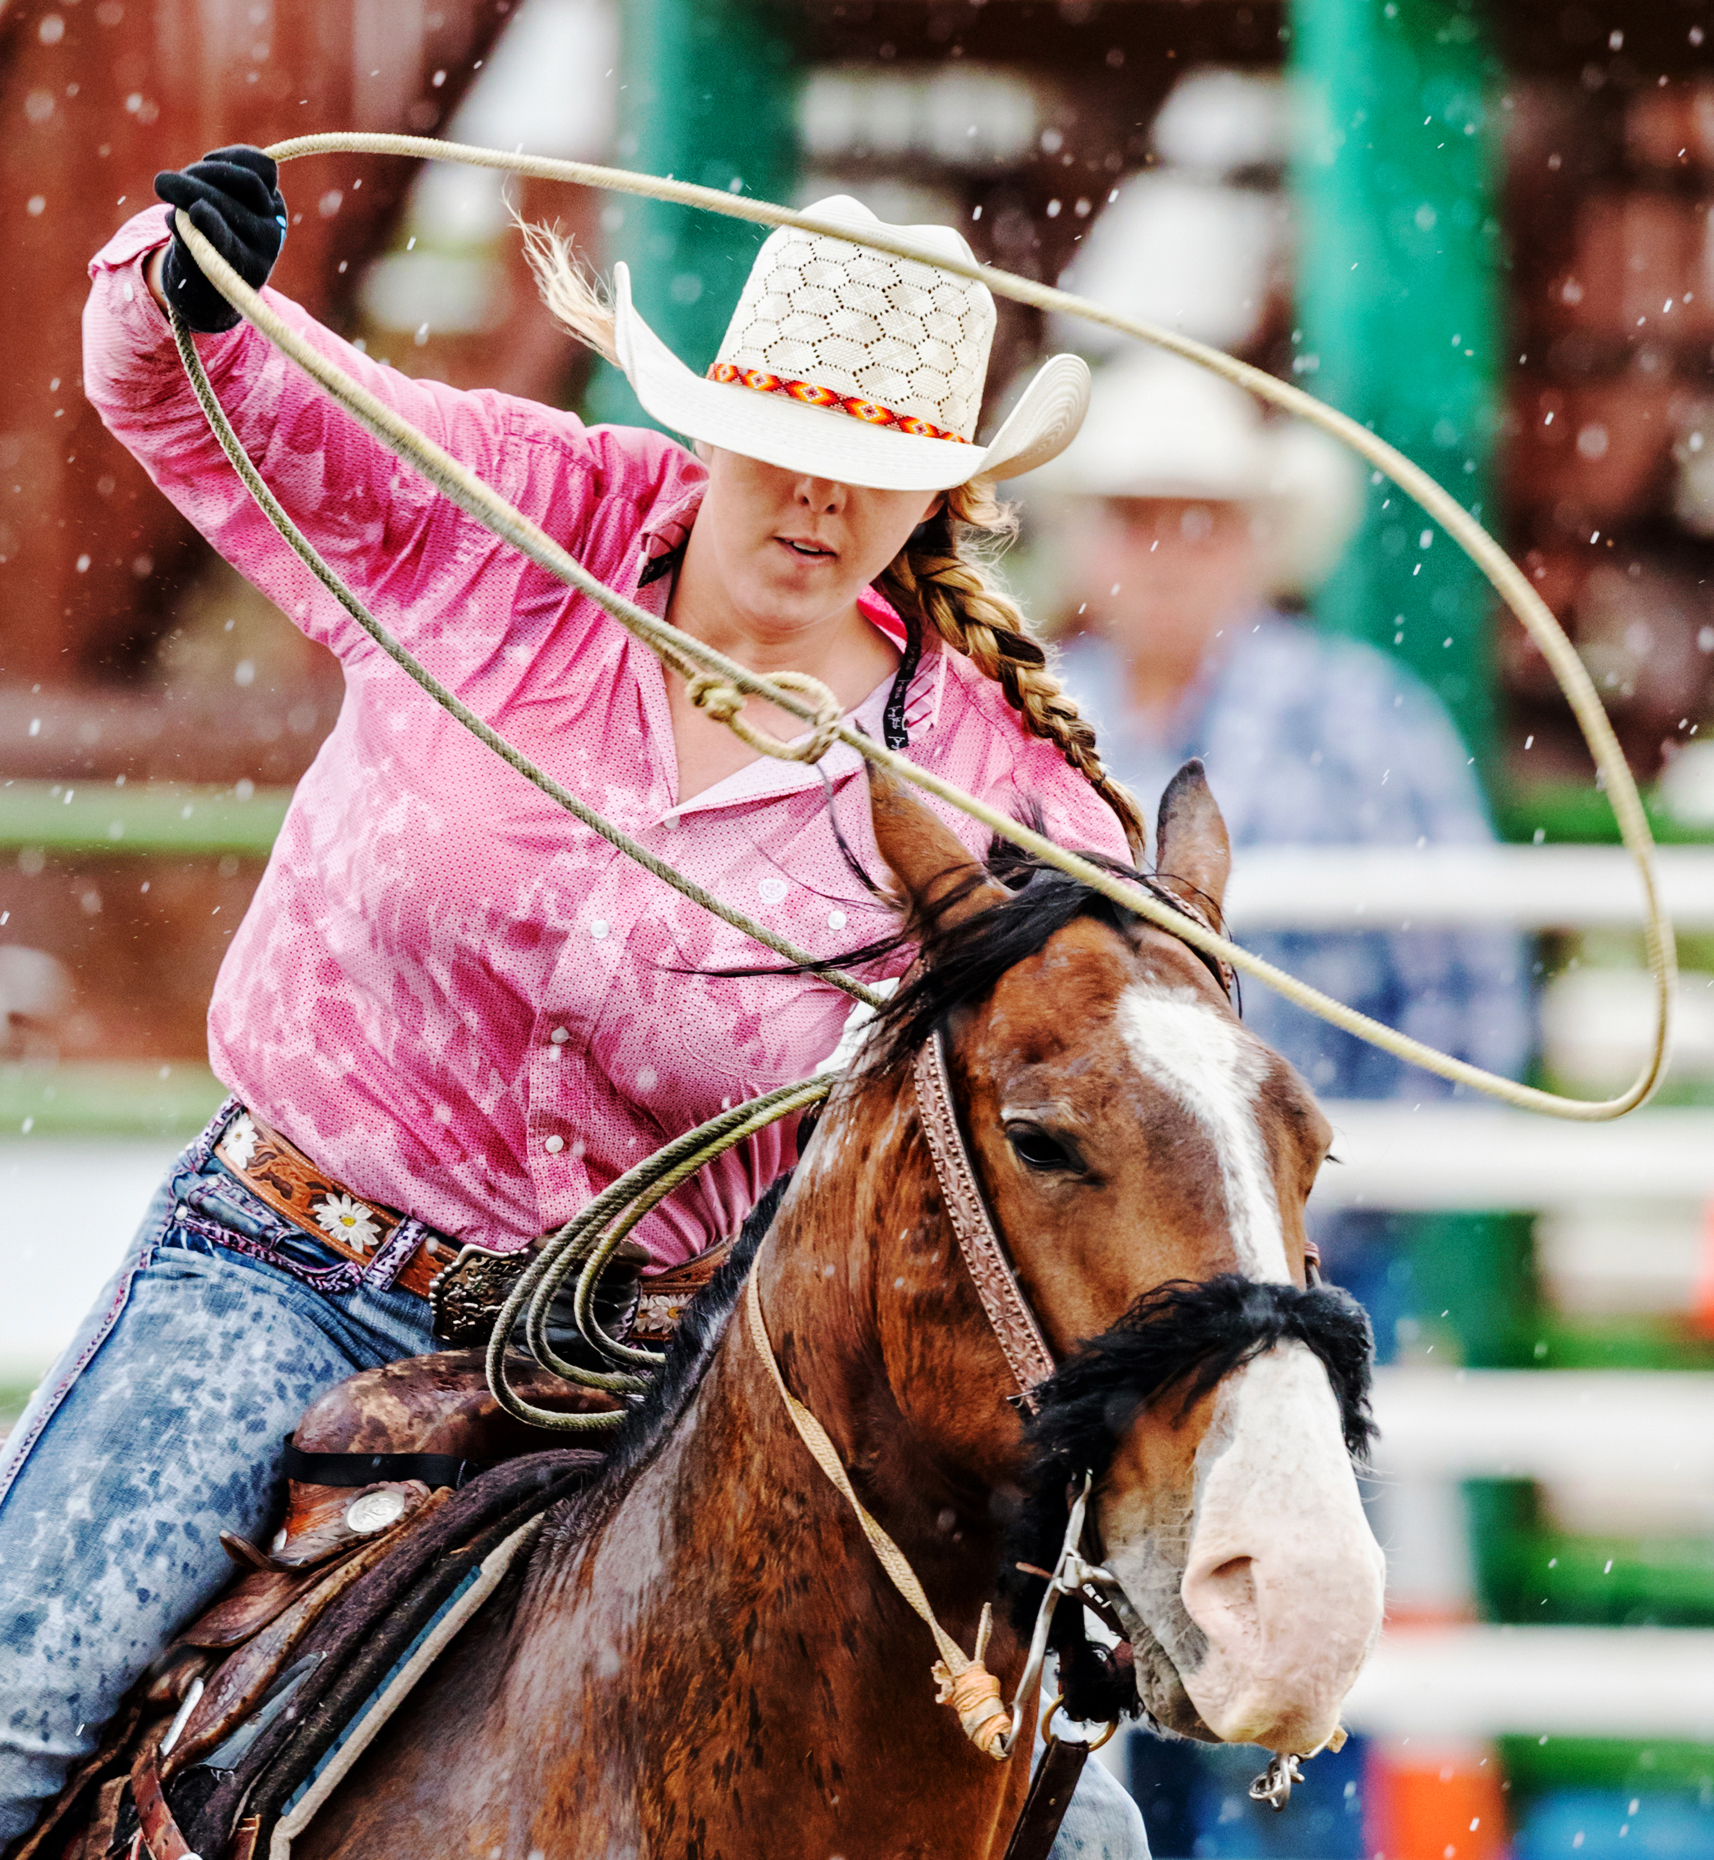 Rodeo cowgirl on horseback competing in calf roping, or tie-down roping event, Chaffee County Fair & Rodeo, Salida, Colorado, USA